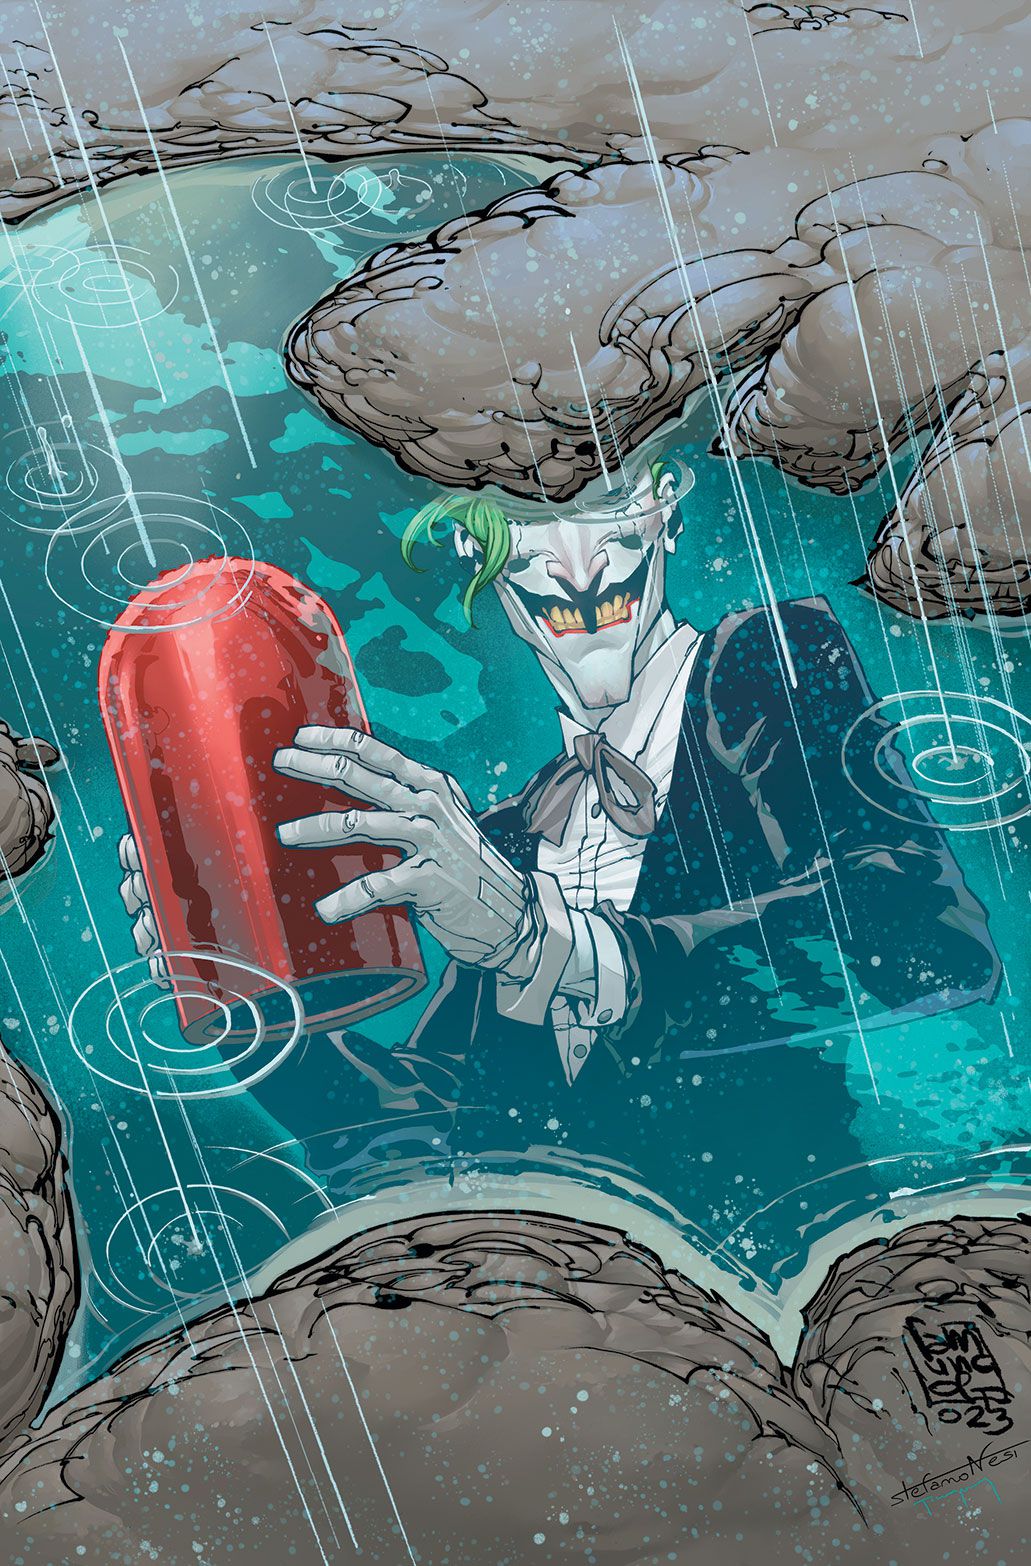 The Joker’s image is reflected in a bat-shaped puddle. His eyes are not visible, but he’s grinning and holding his Red Hood mask.